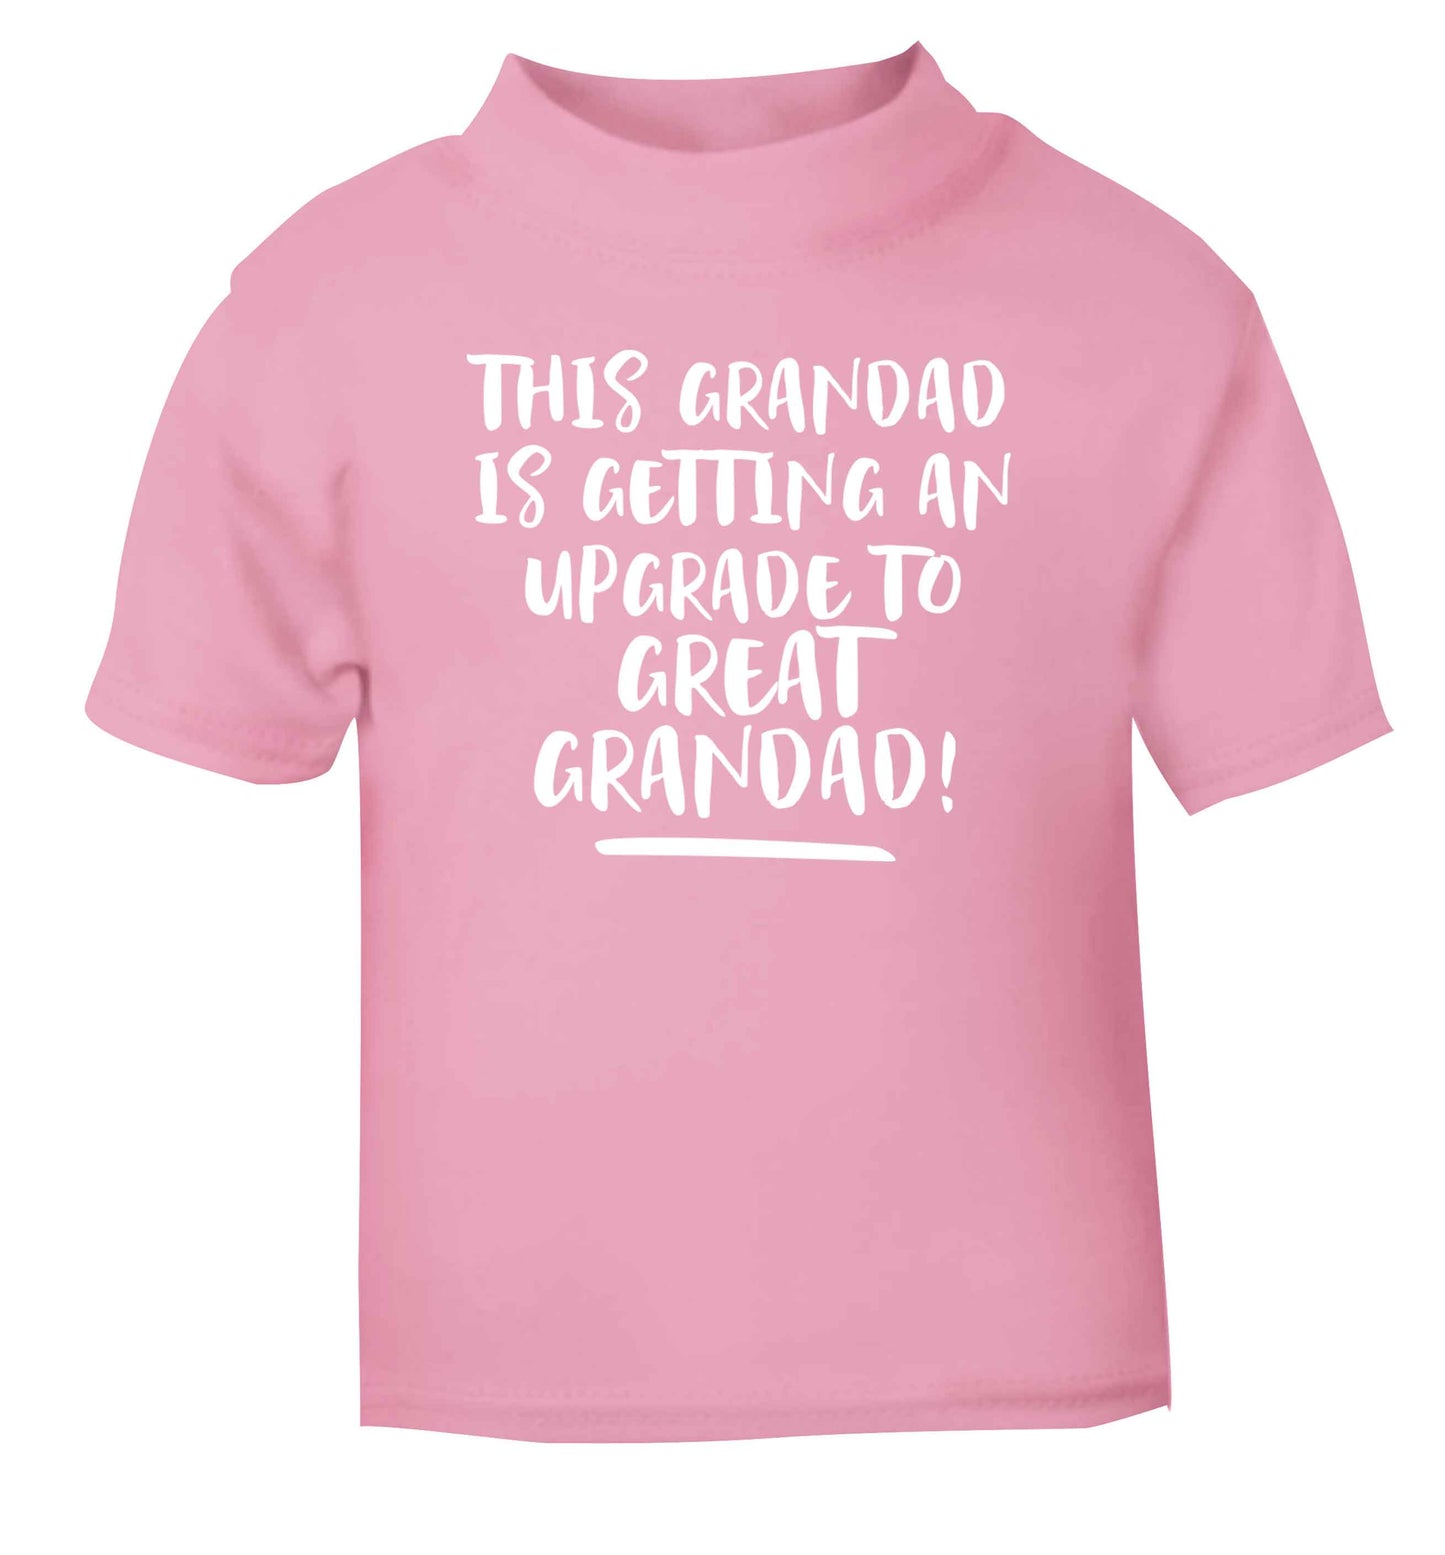 This grandad is getting an upgrade to great grandad! light pink Baby Toddler Tshirt 2 Years